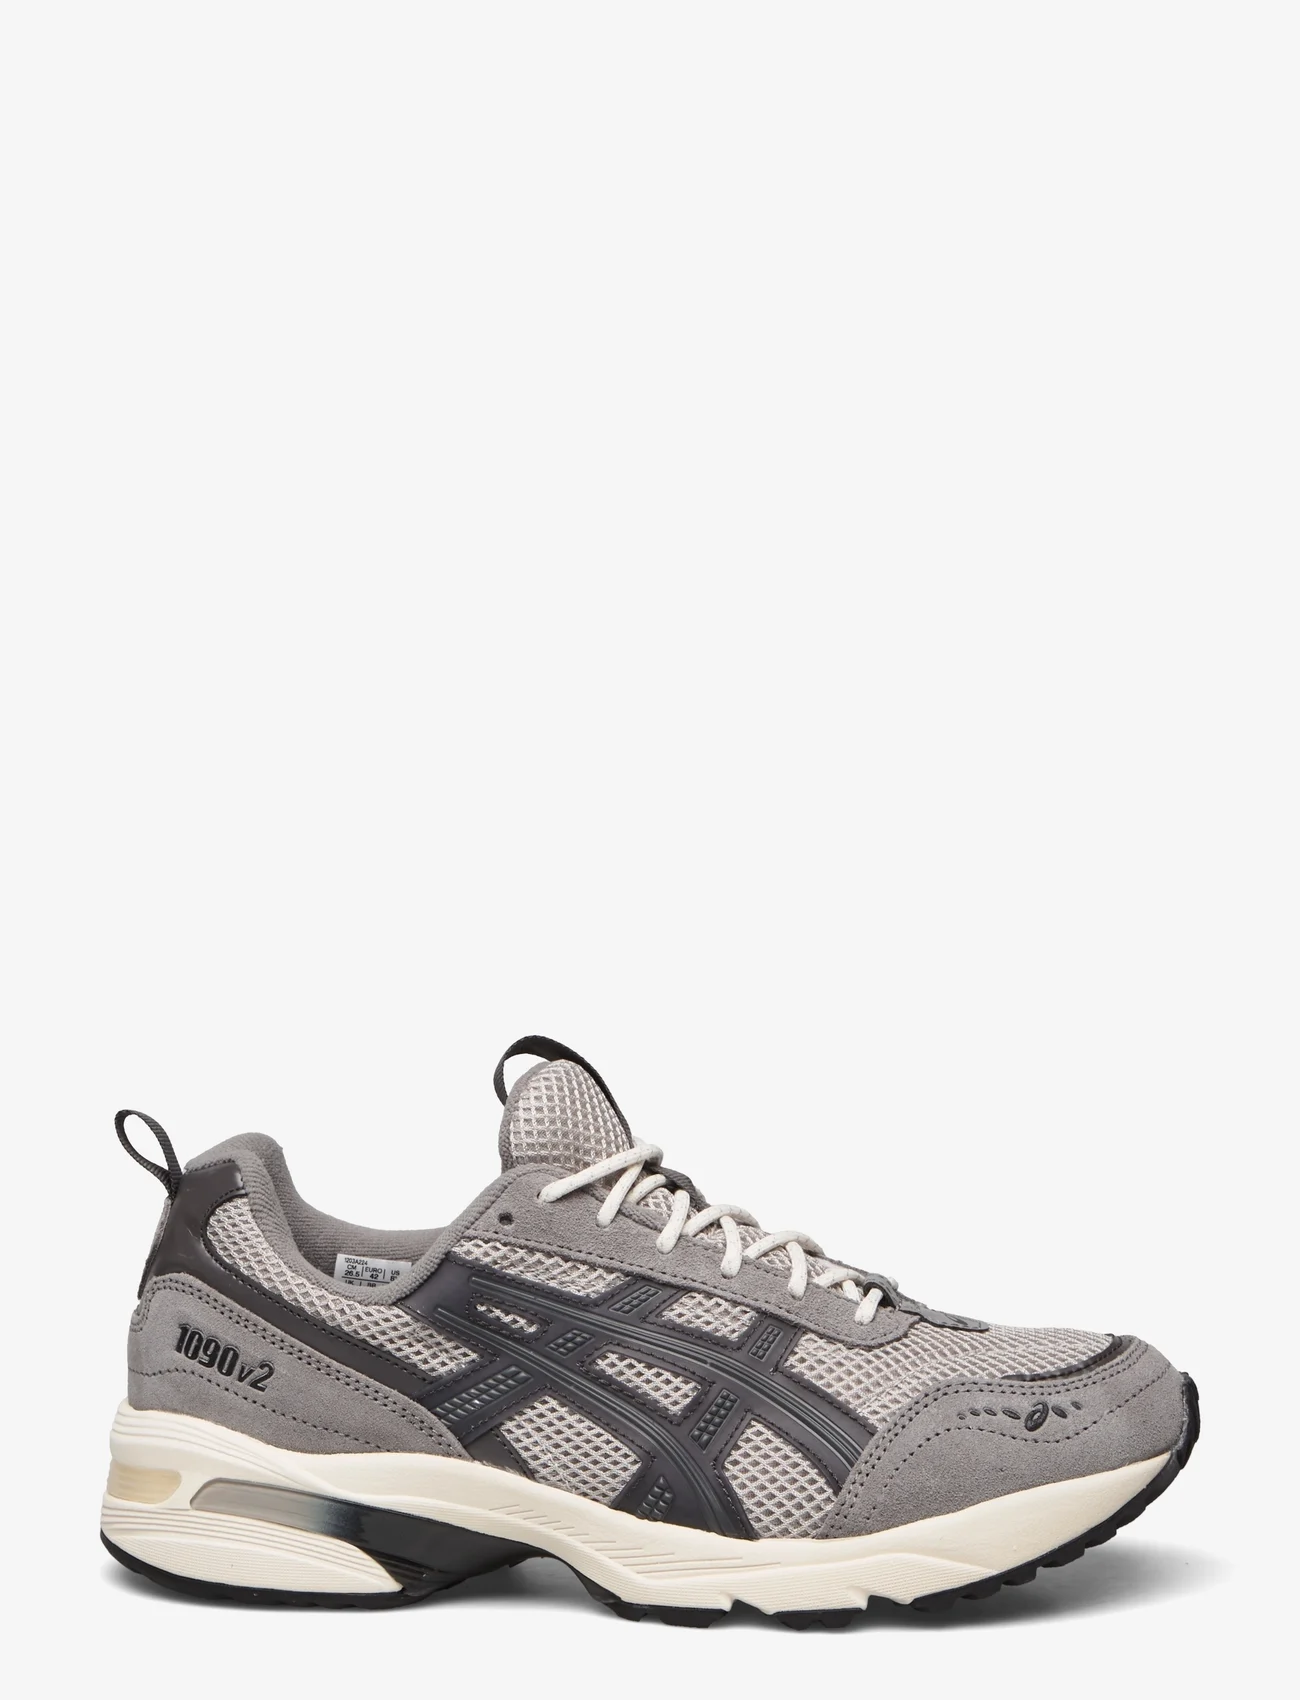 Asics - GEL-1090v2 - low top sneakers - oyster grey/clay grey - 1